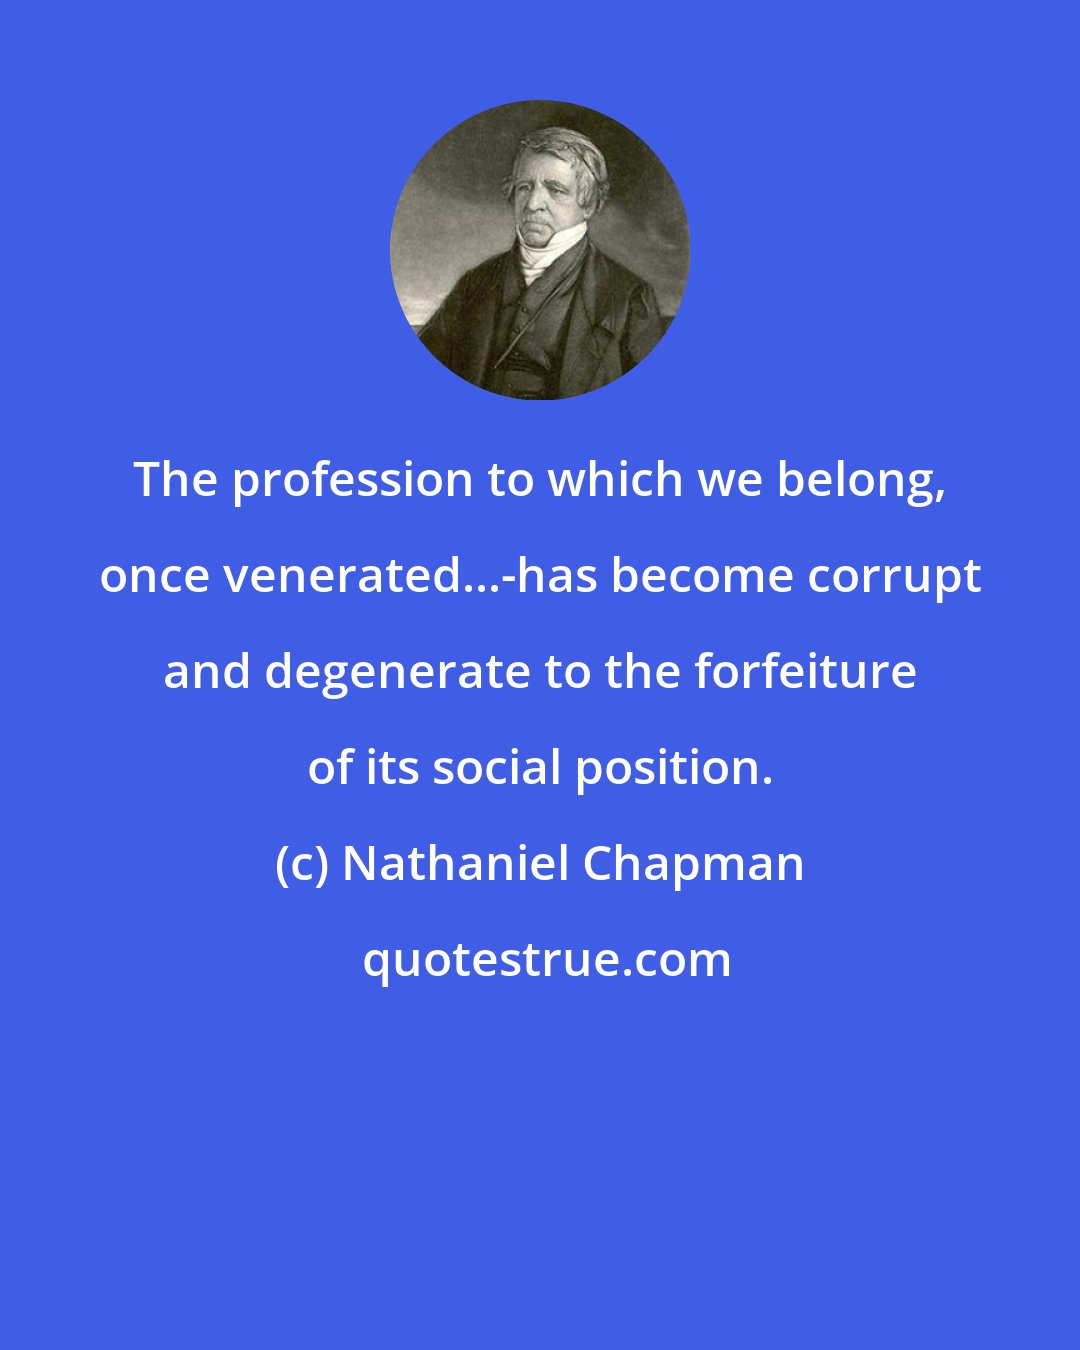 Nathaniel Chapman: The profession to which we belong, once venerated...-has become corrupt and degenerate to the forfeiture of its social position.